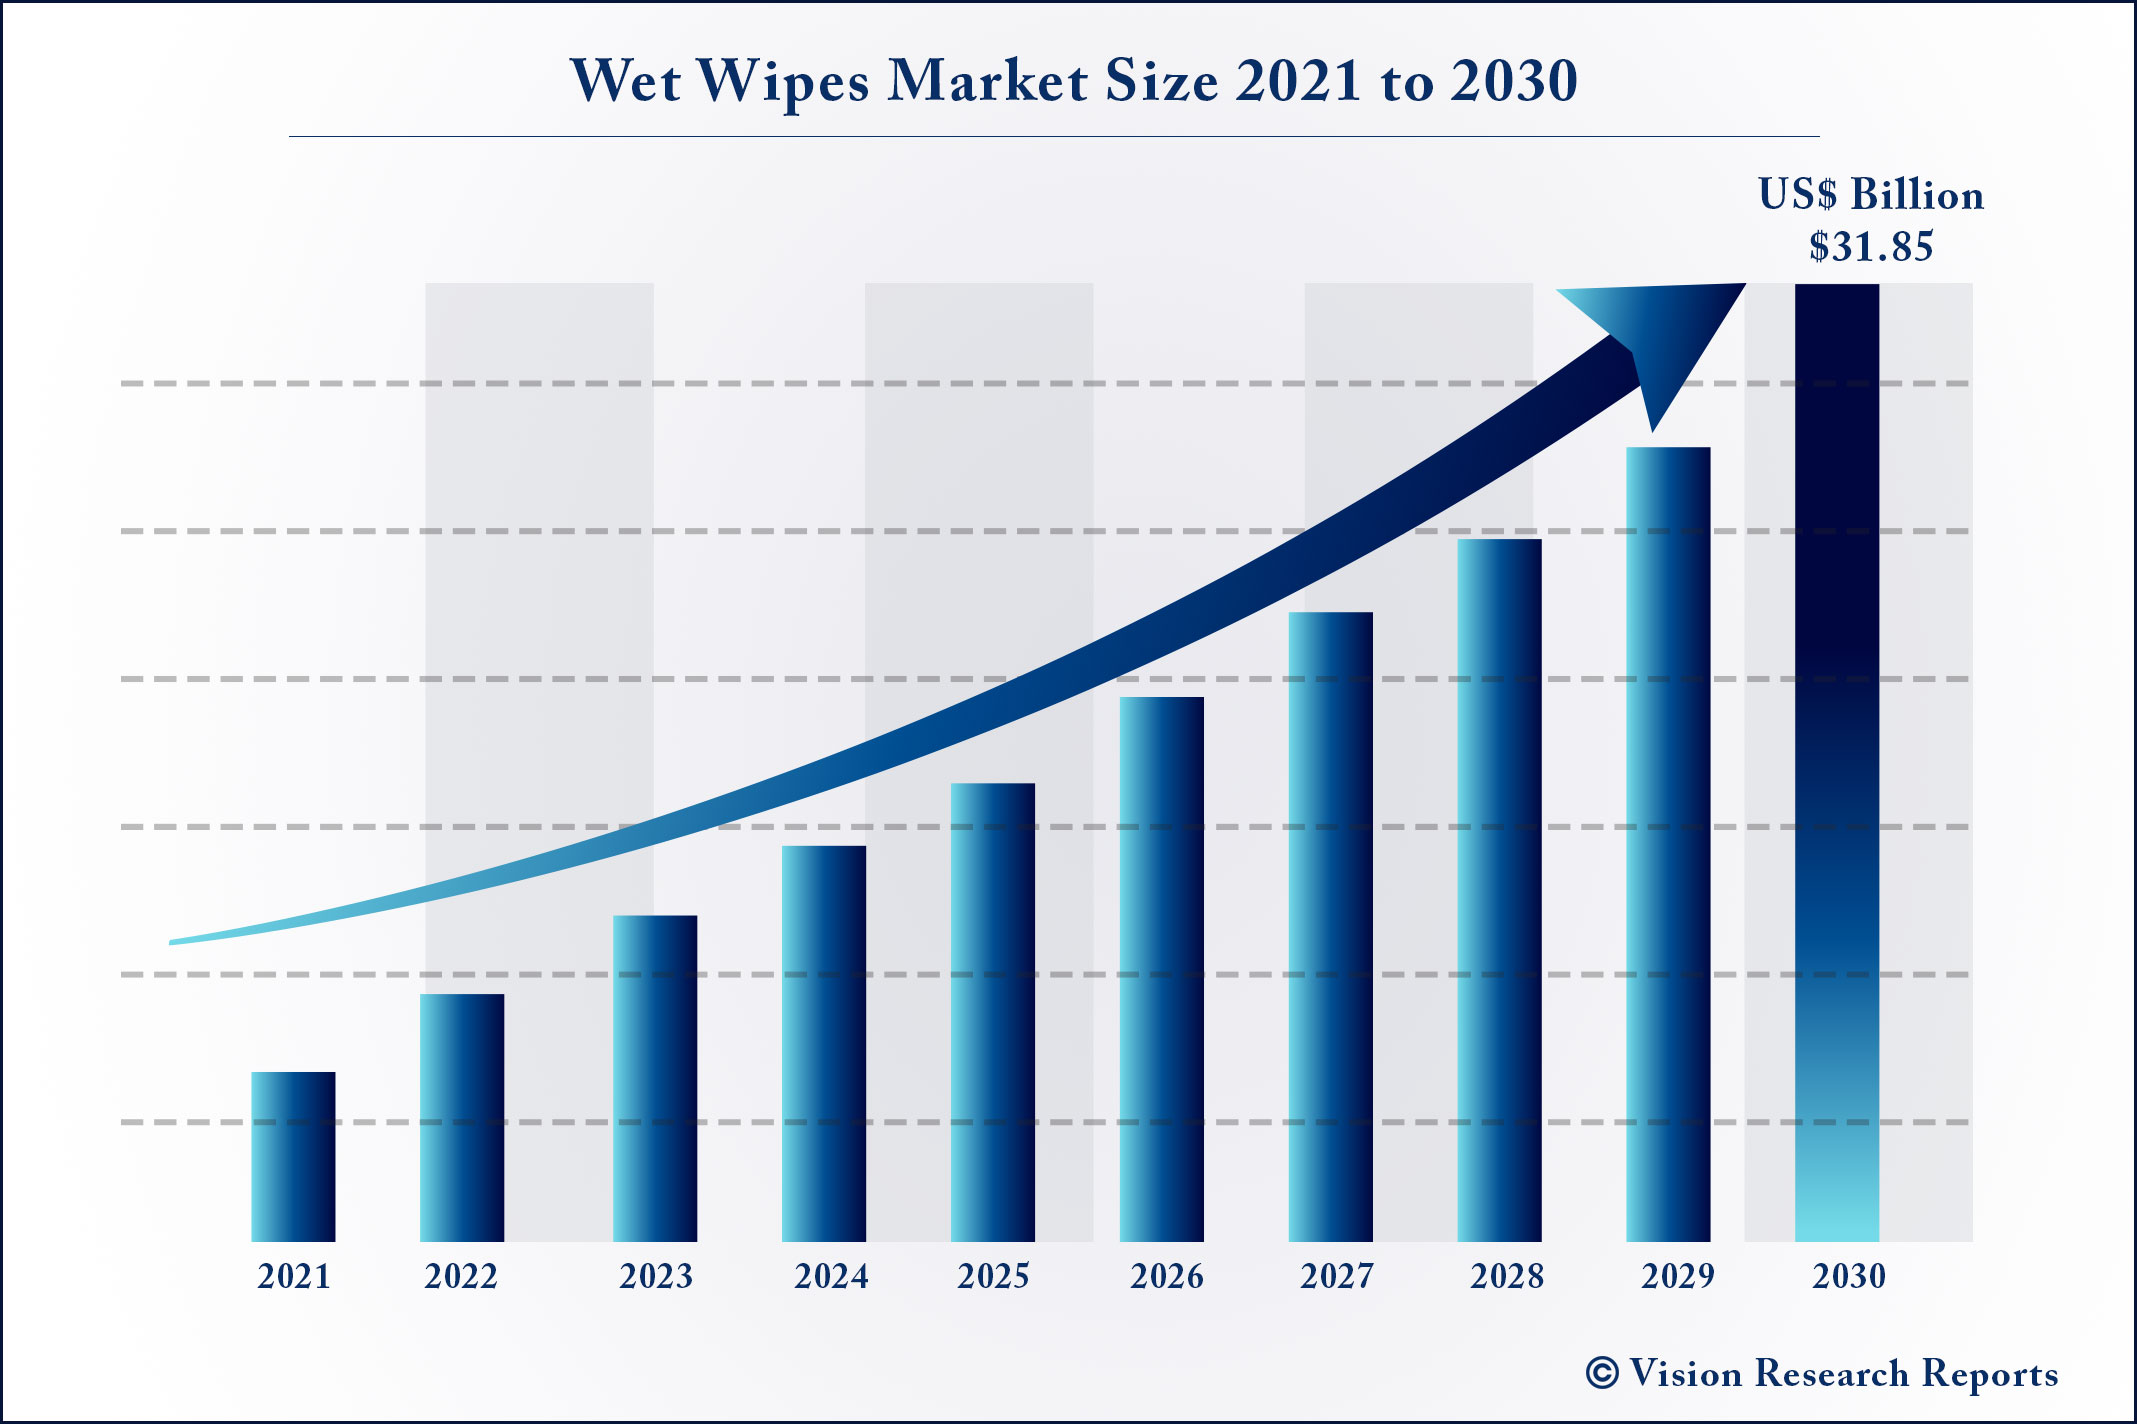 Wet Wipes Market Size 2021 to 2030